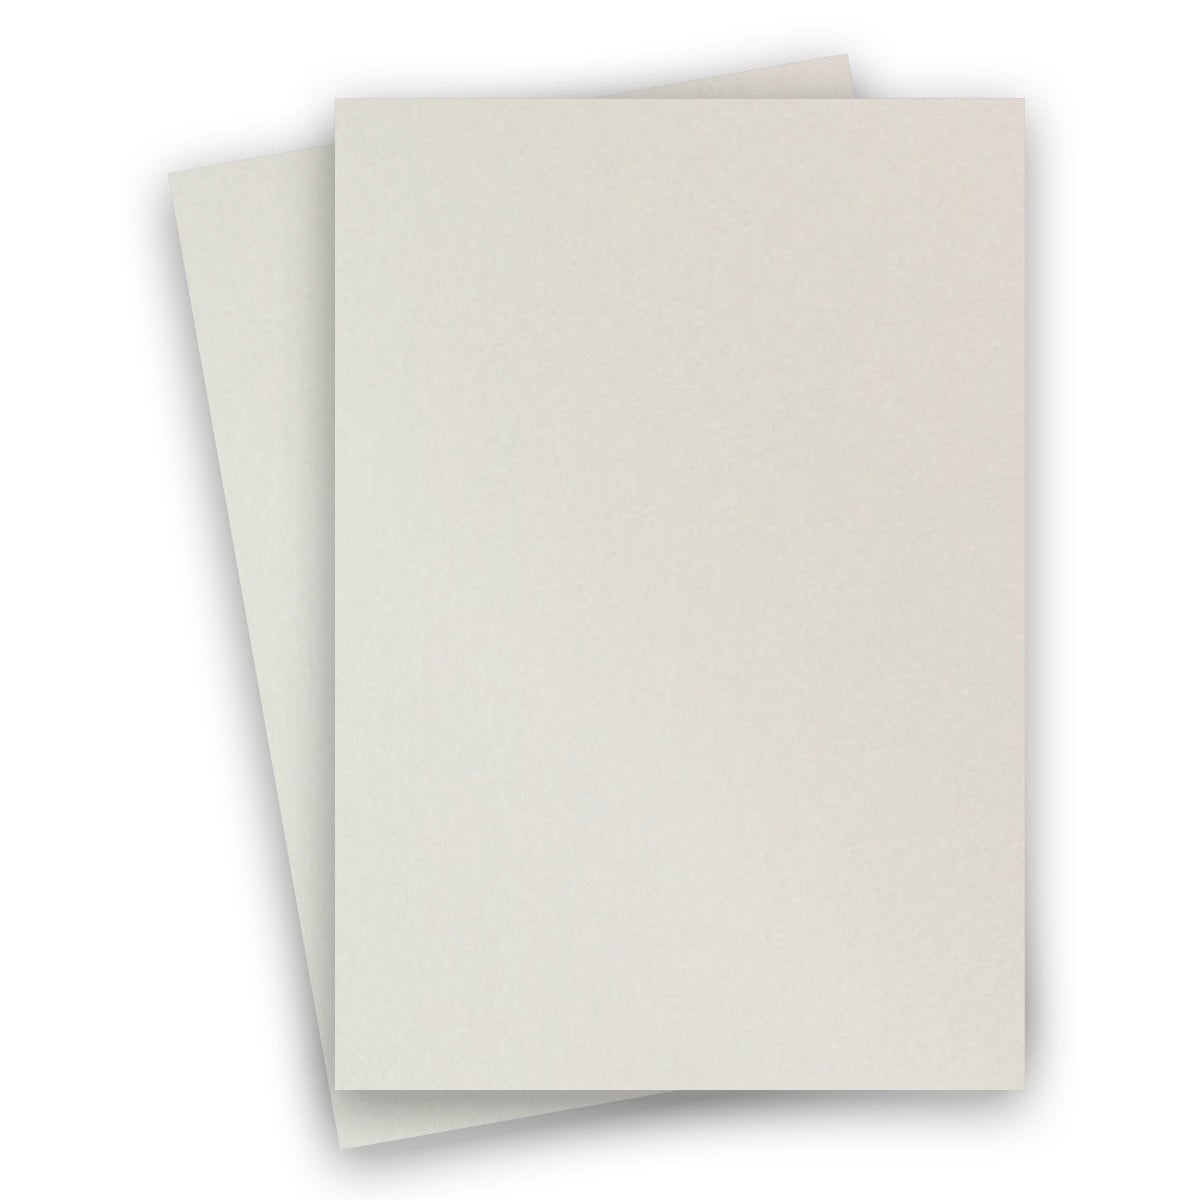  100 Sheets Cream Cardstock 8.5 x 11 Ivory Paper, Goefun Off  White Card Stock Printer Paper for Cards Making, Office Printing, Paper  Crafting : Arts, Crafts & Sewing